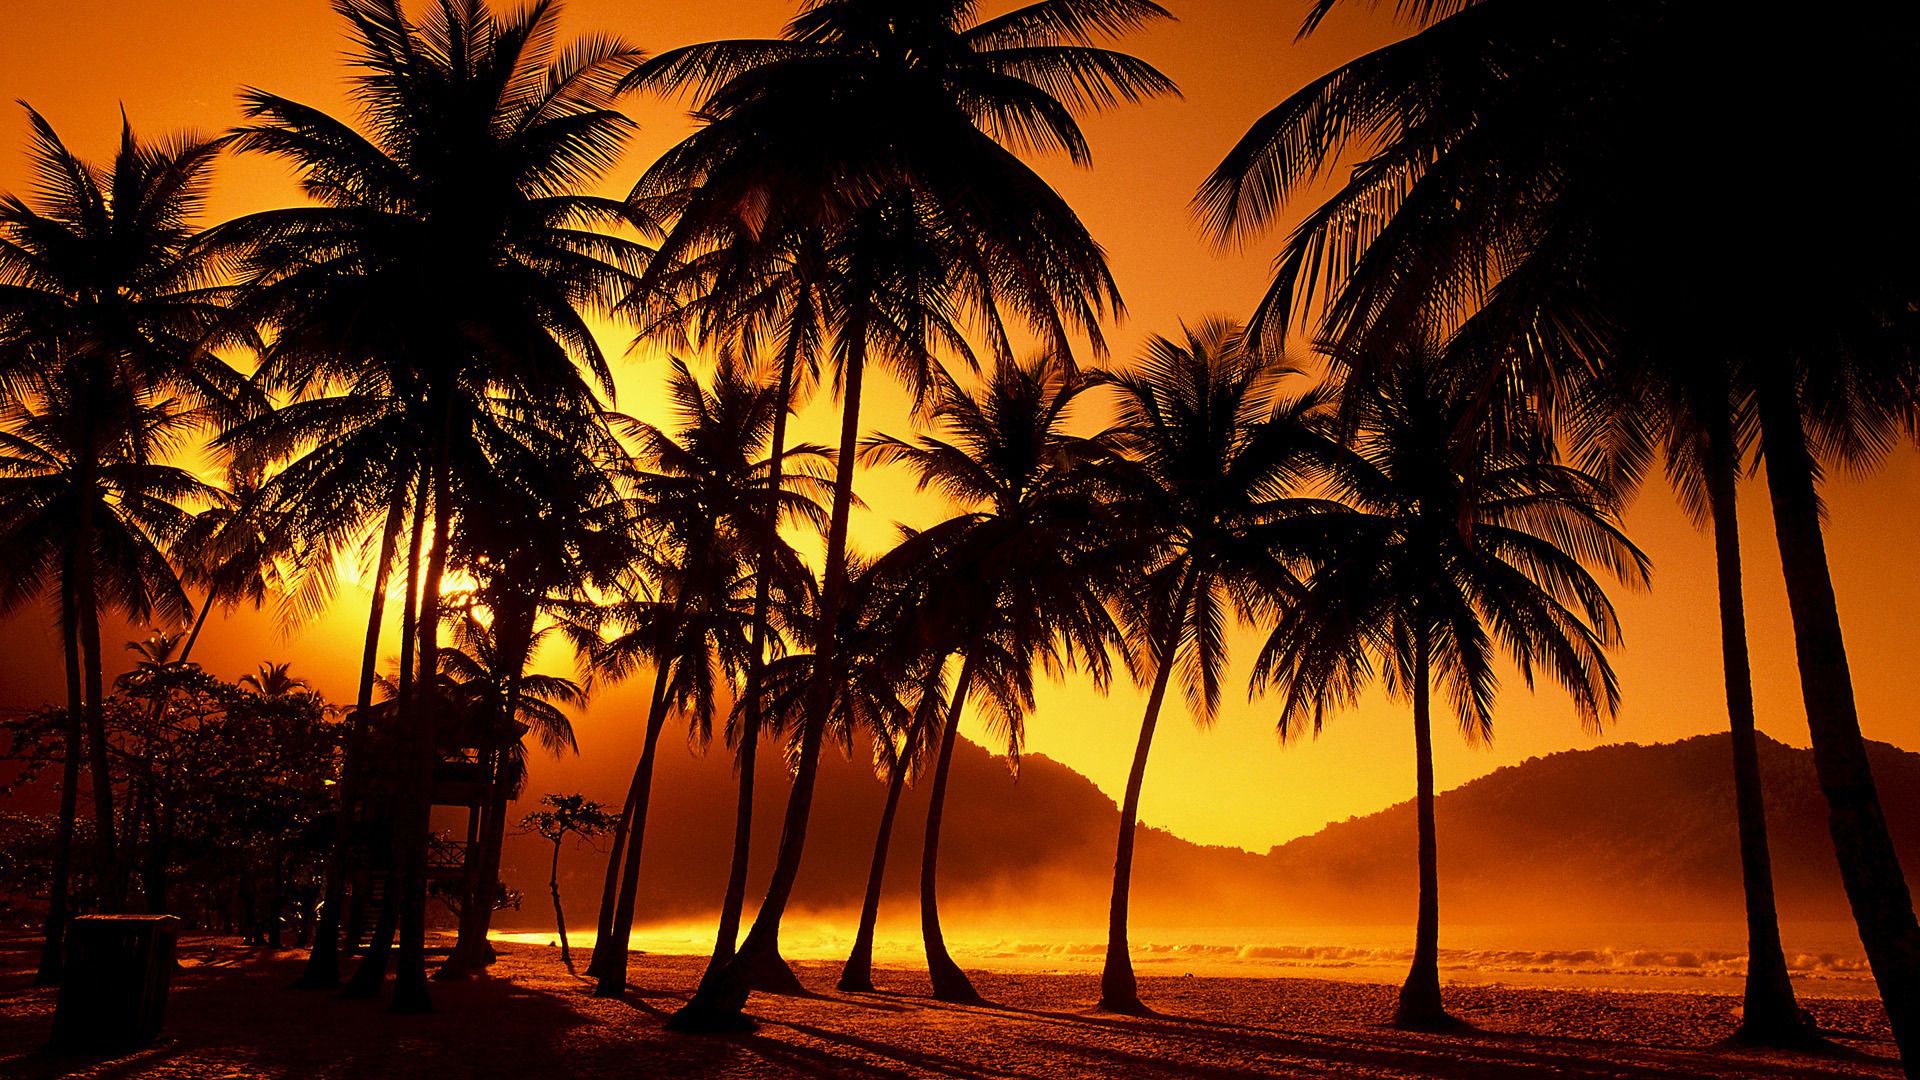 Palm Trees In The Sunset HD Wallpaper .horizononesolutions.com